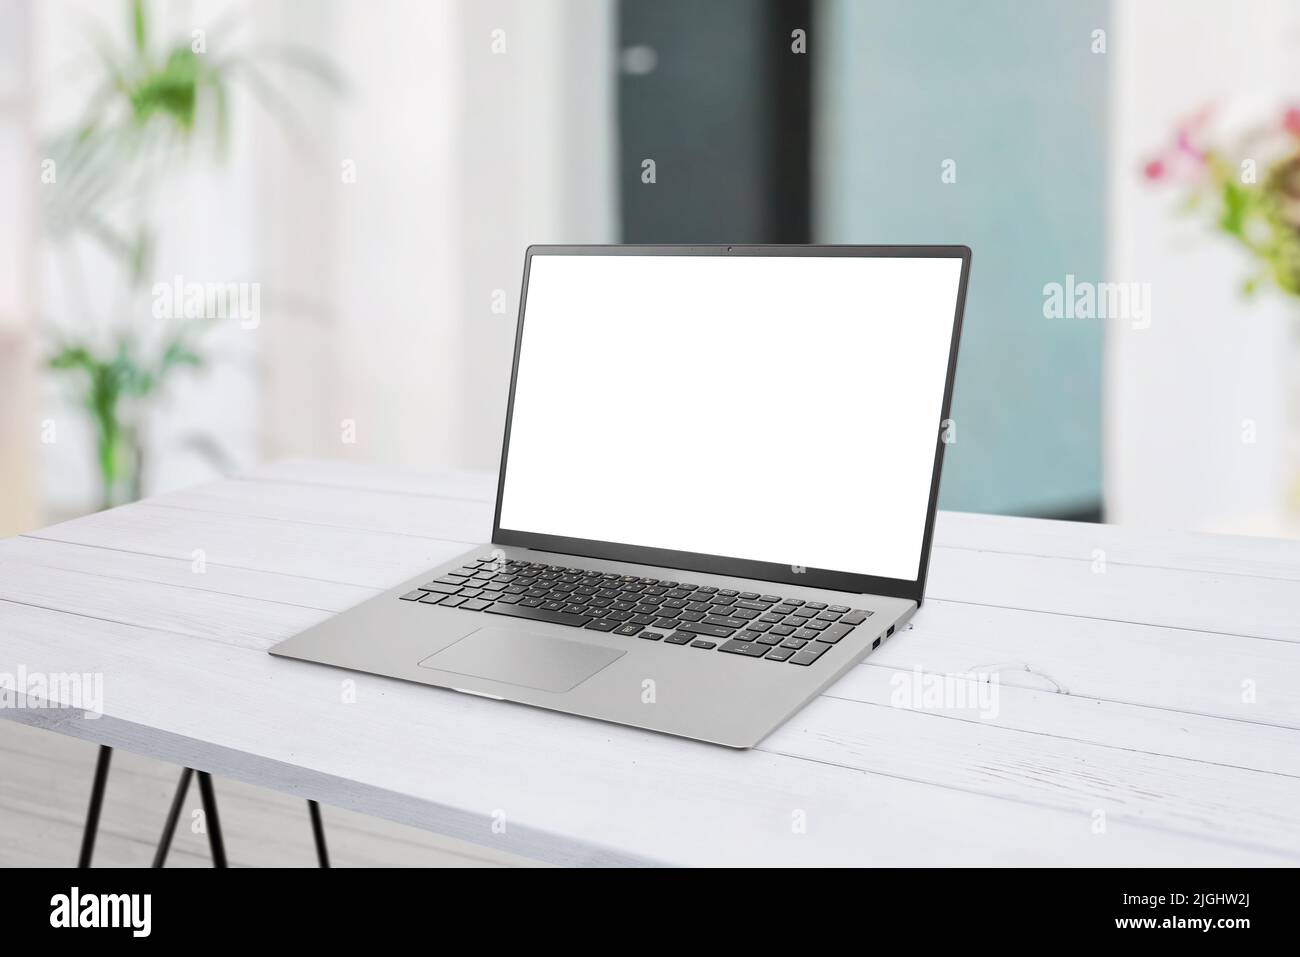 Laptop mockup on desk. Clean flat composition. Isolated display for web page mockup. Living room interior in background Stock Photo